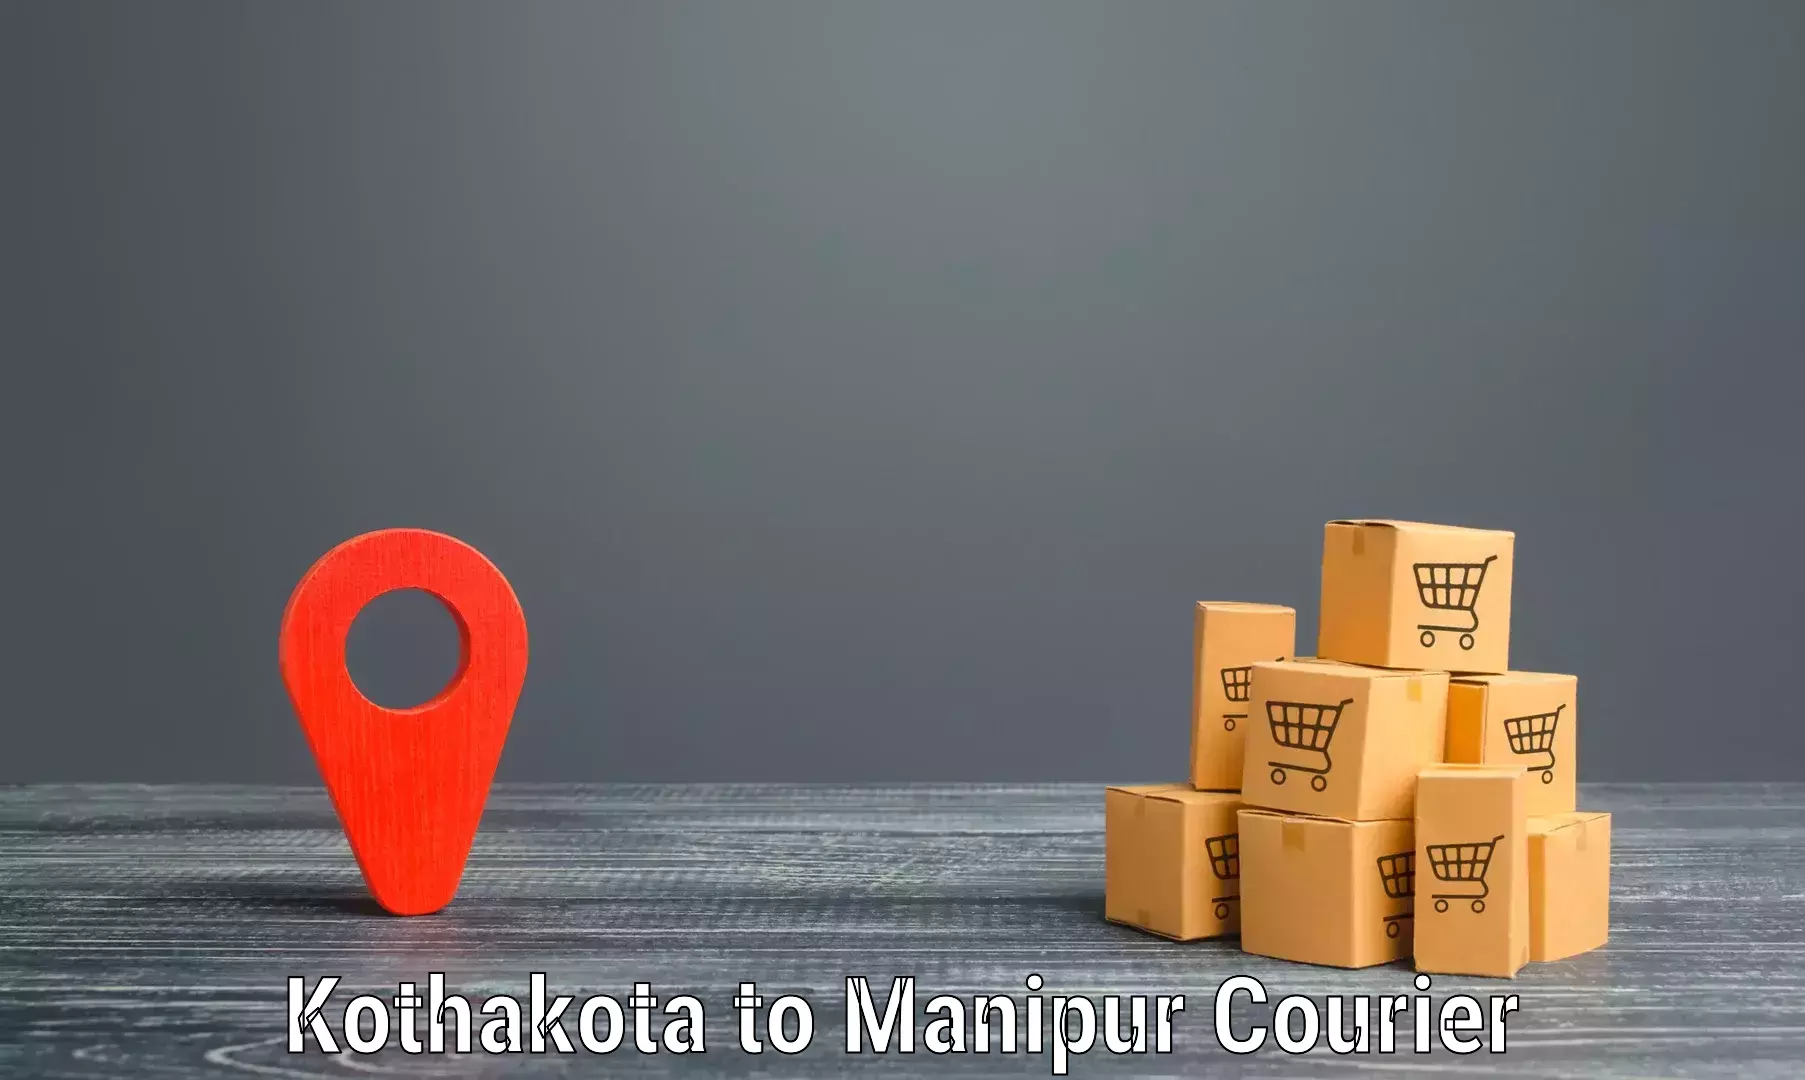 Same-day delivery solutions Kothakota to Manipur